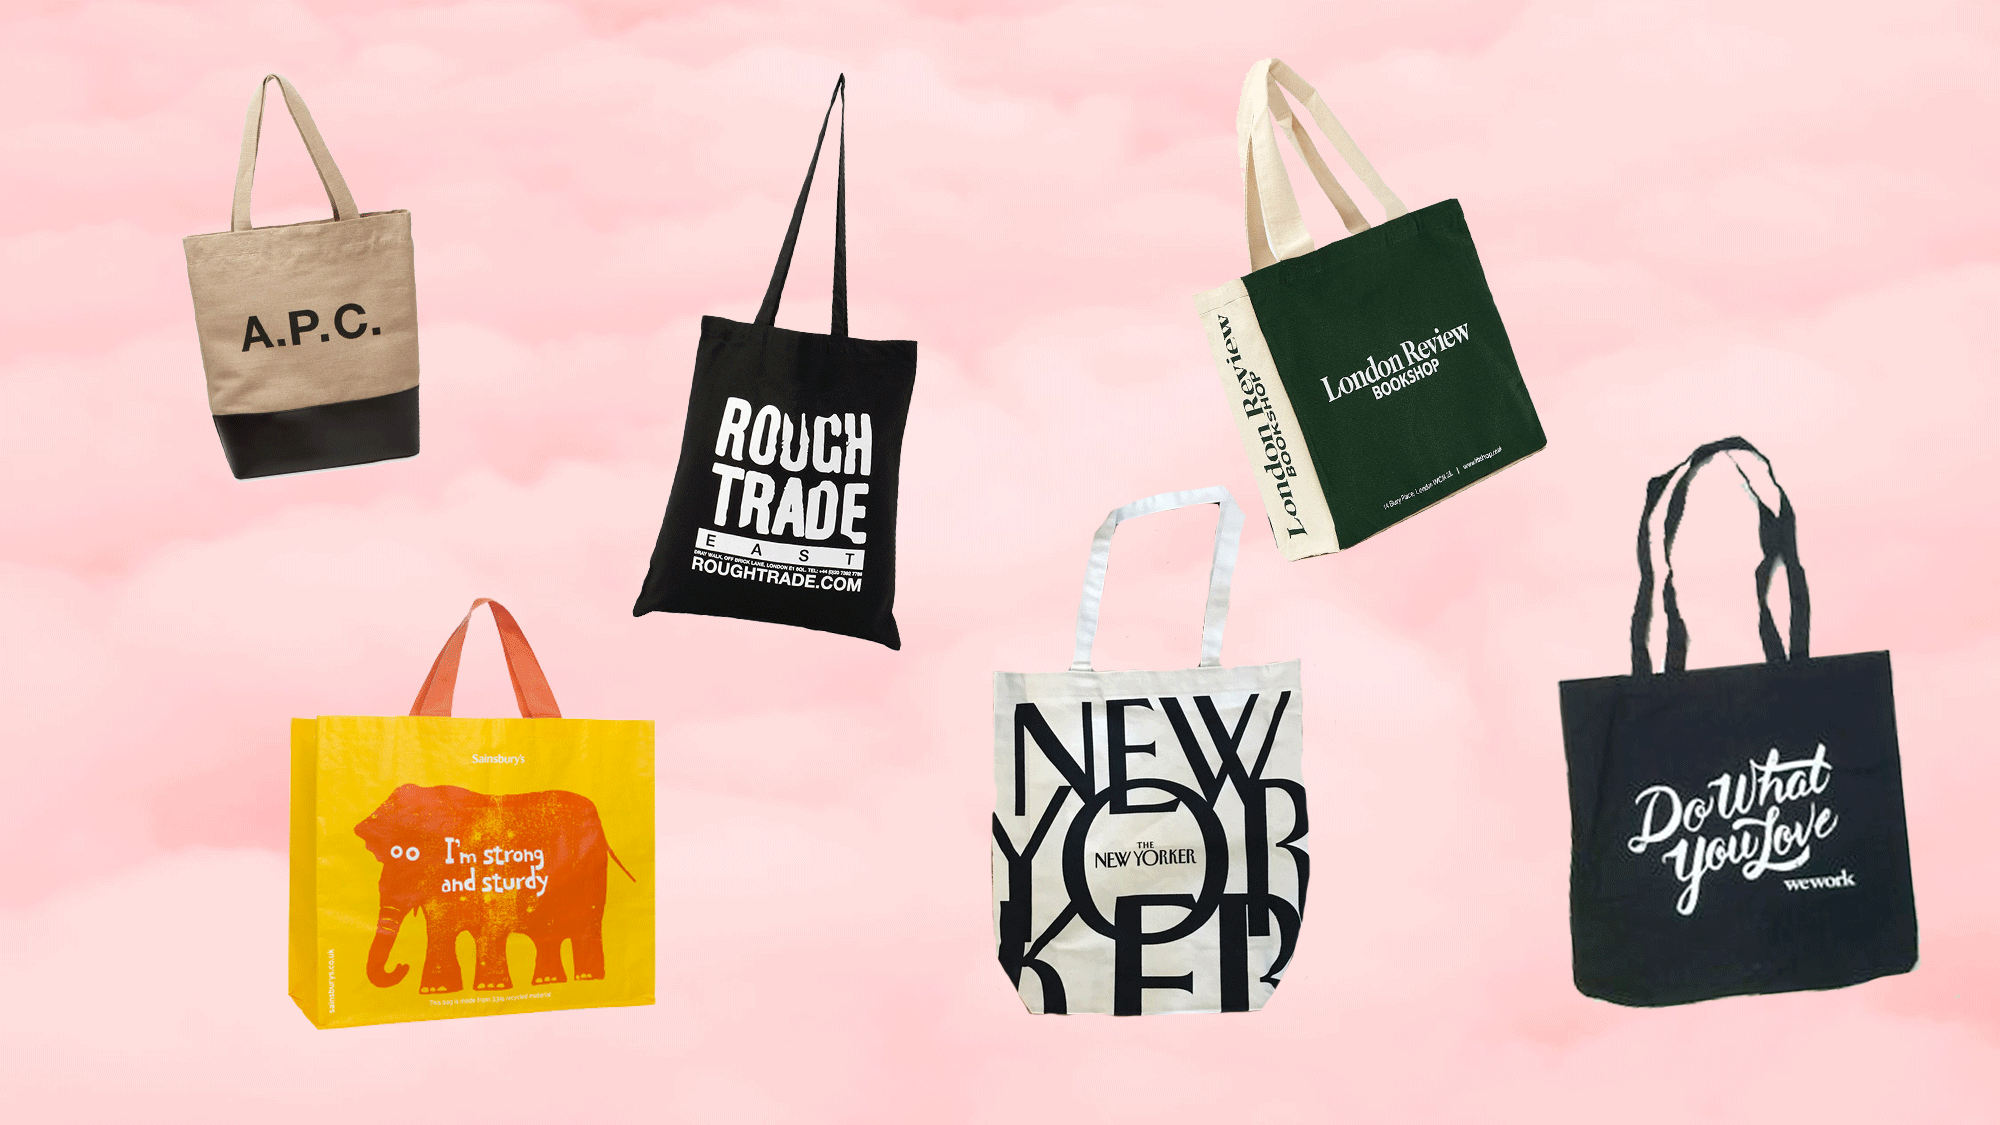 Book a Personal Shopper for Free at Famous Brands – New Yorker Tips